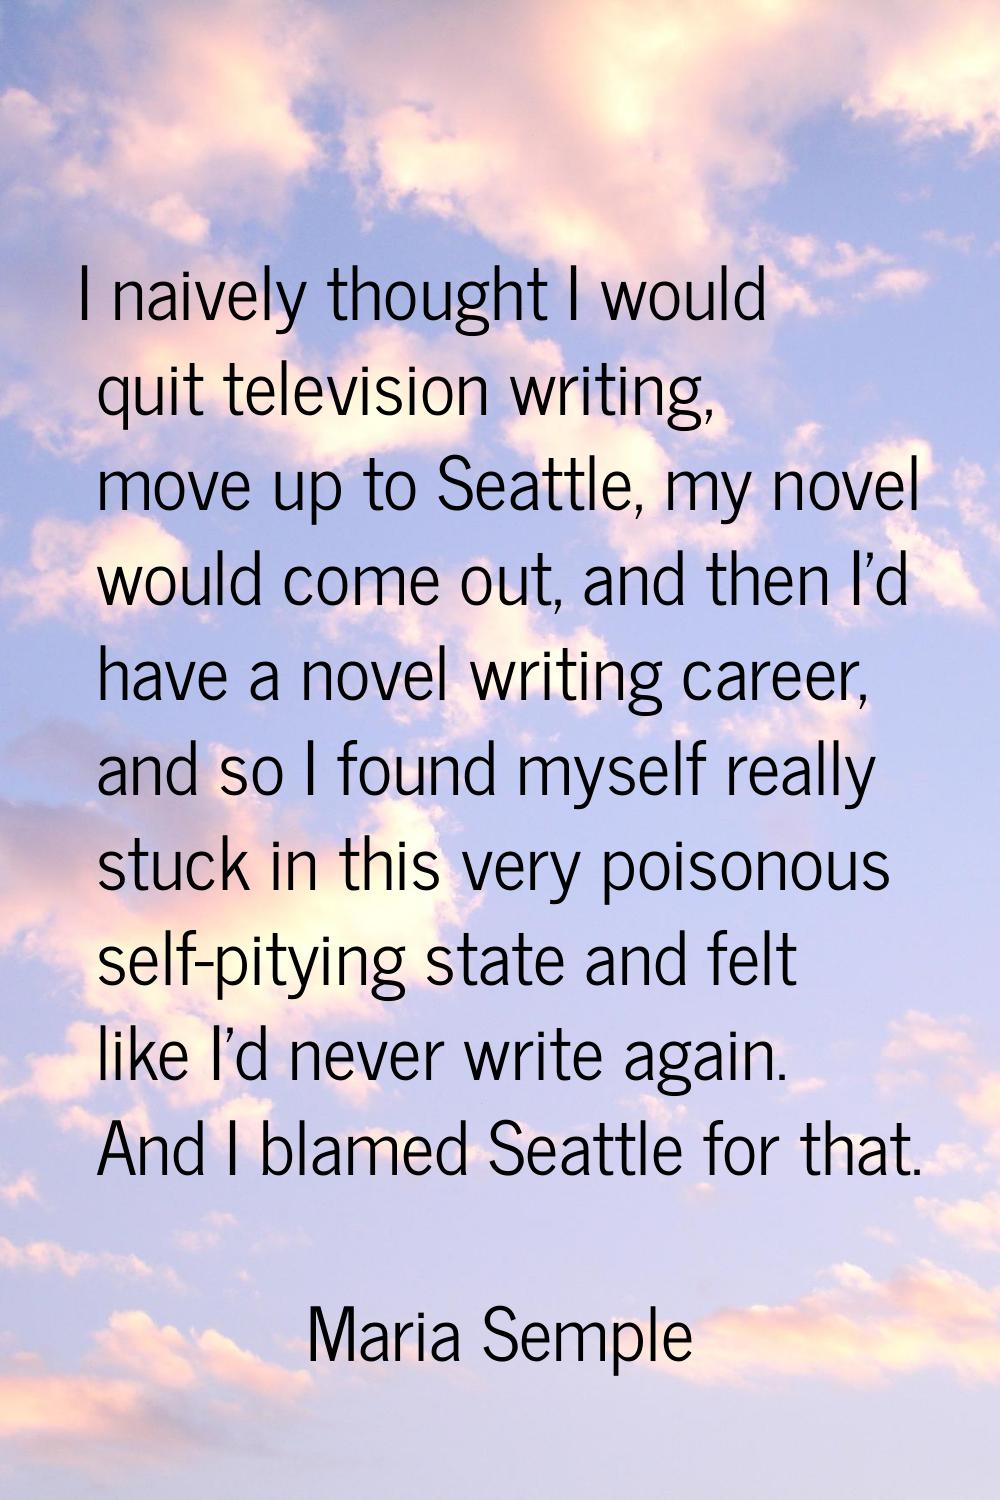 I naively thought I would quit television writing, move up to Seattle, my novel would come out, and